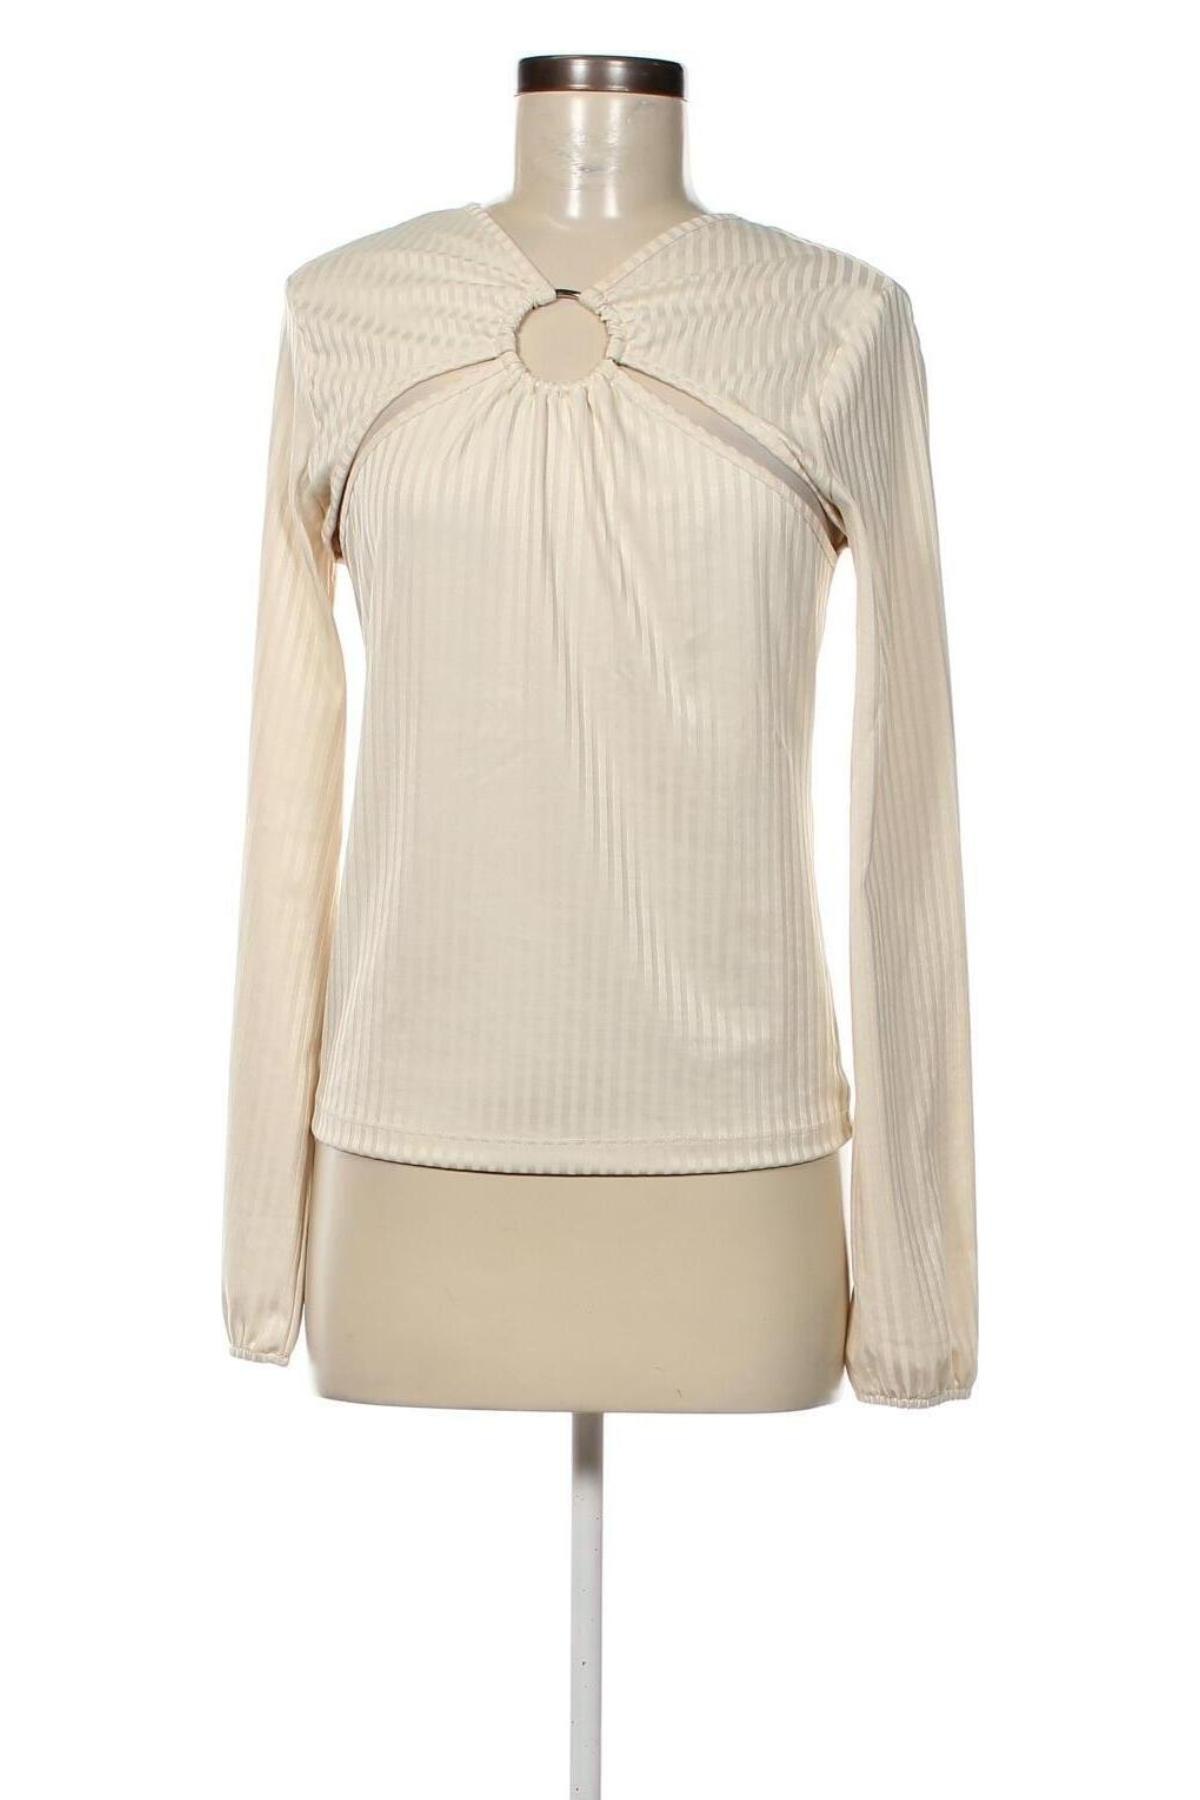 Damen Shirt Katy Perry exclusive for ABOUT YOU, Größe M, Farbe Beige, Preis 19,85 €